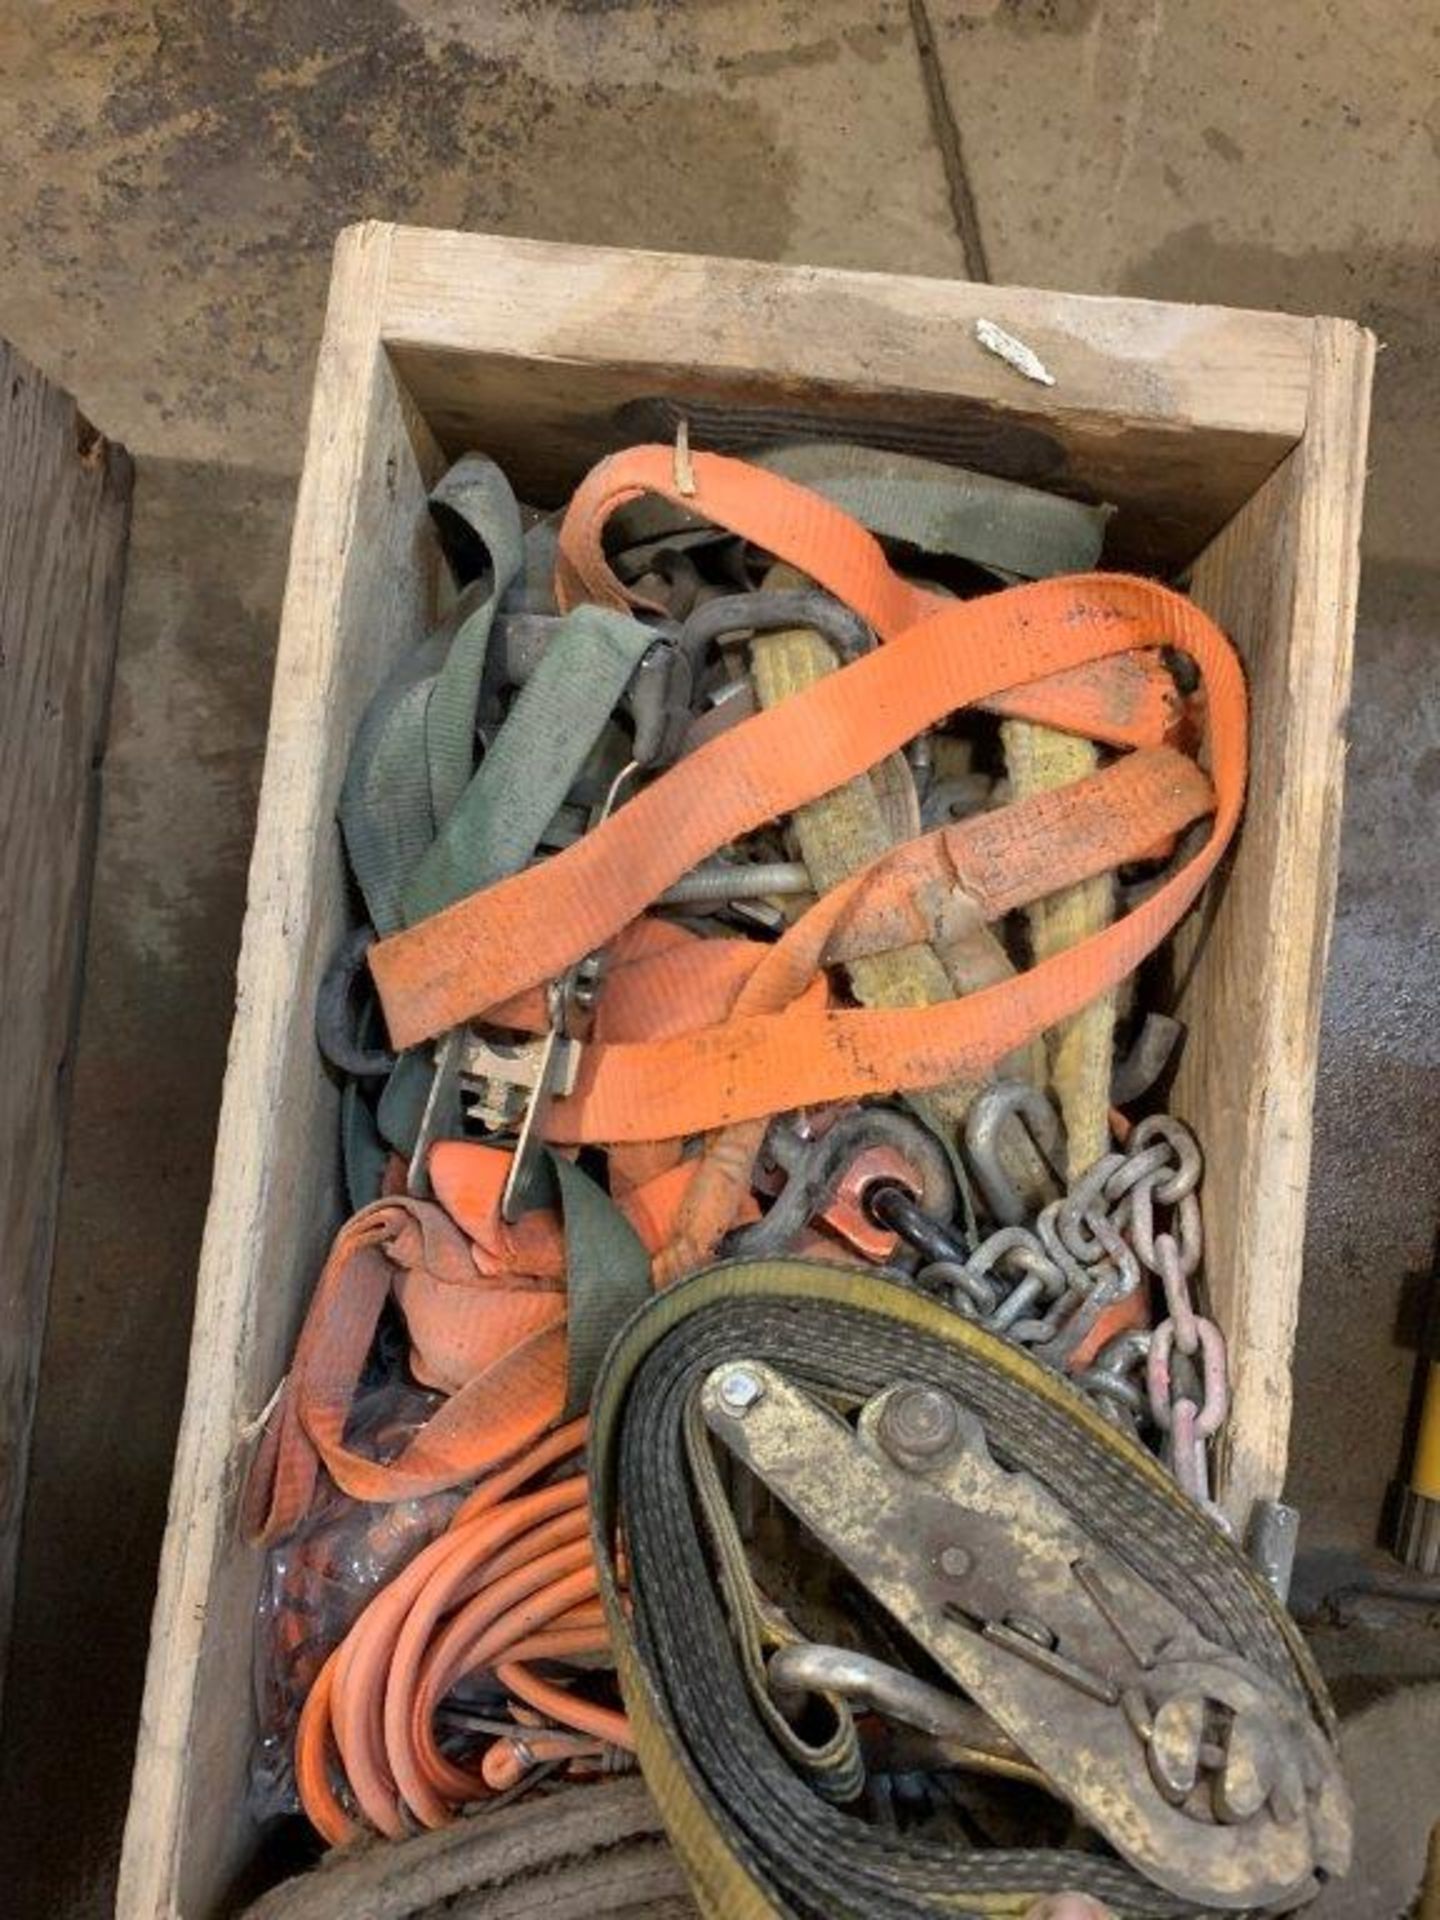 CRATE OF ASSORTED SLINGS, RATCHET STRAPS, BUNGEES, ETC. - Image 3 of 4